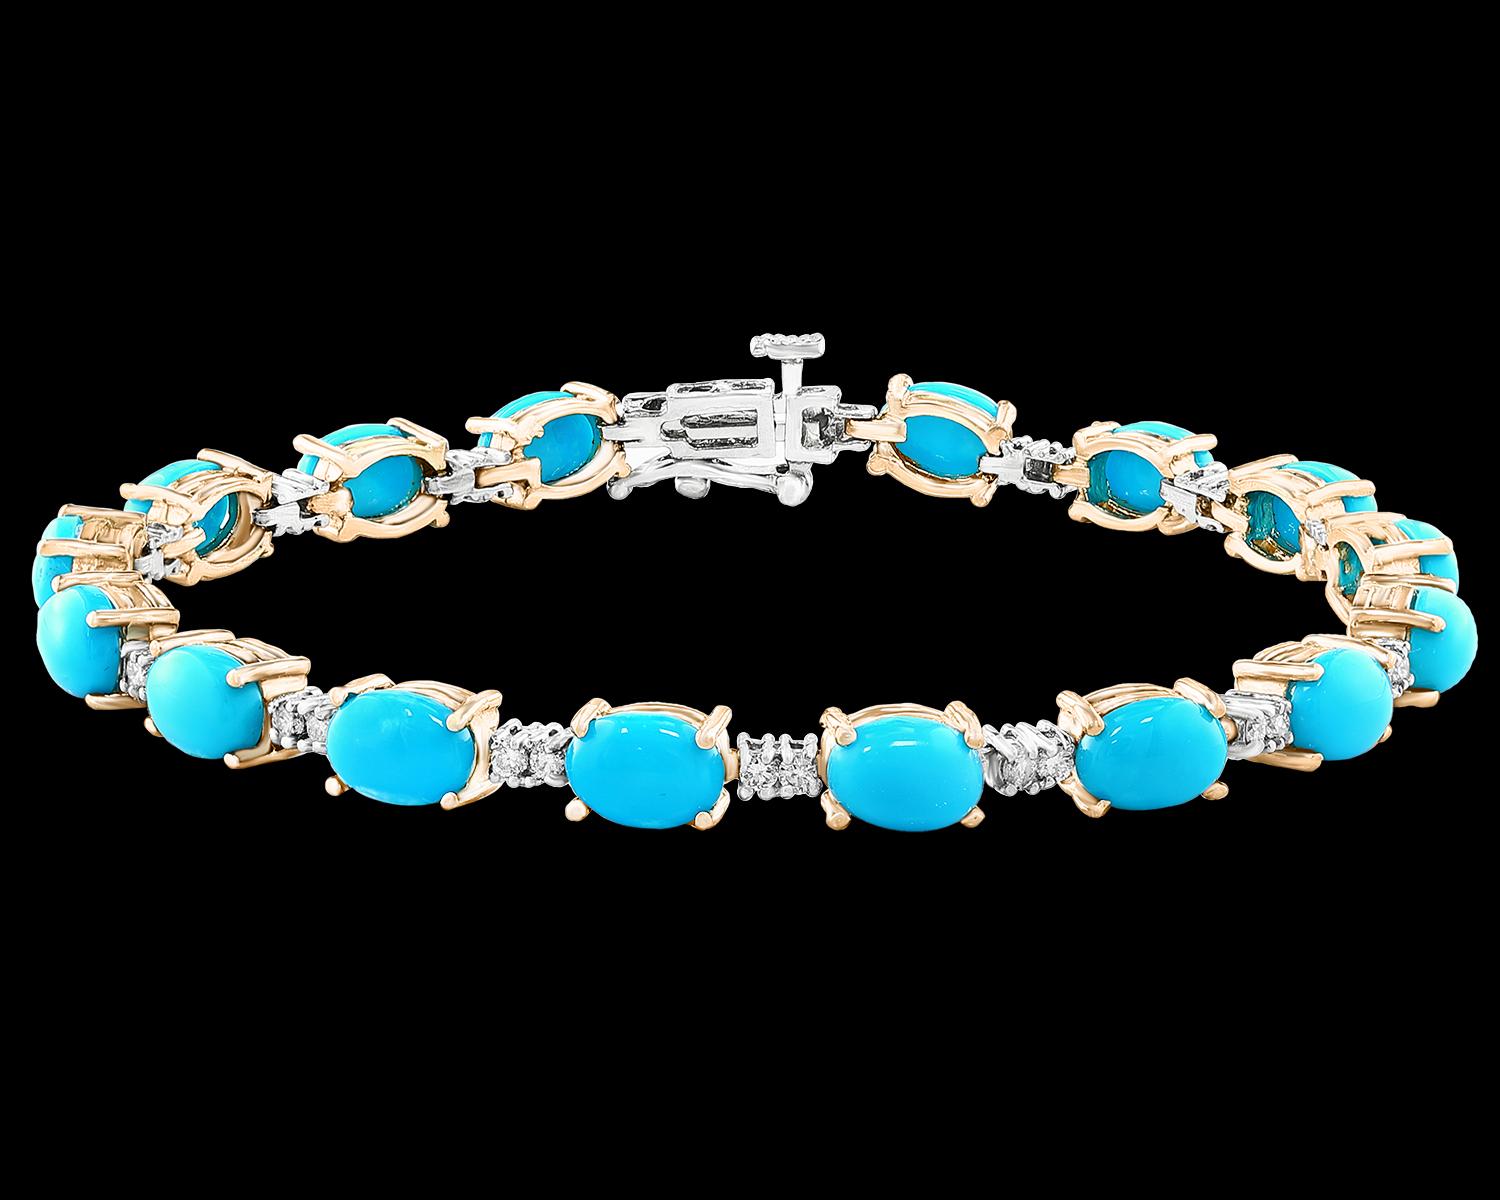 Rare and classic 8 Ct Natural Sleeping Beauty Turquoise & Diamond Tennis Bracelet 14 K White Gold
 This exceptionally Rare Tennis  bracelet has  16 stones of oval  Sleeping Beauty  . Each Oval sleeping beauty turquoise is spaced by two diamonds .